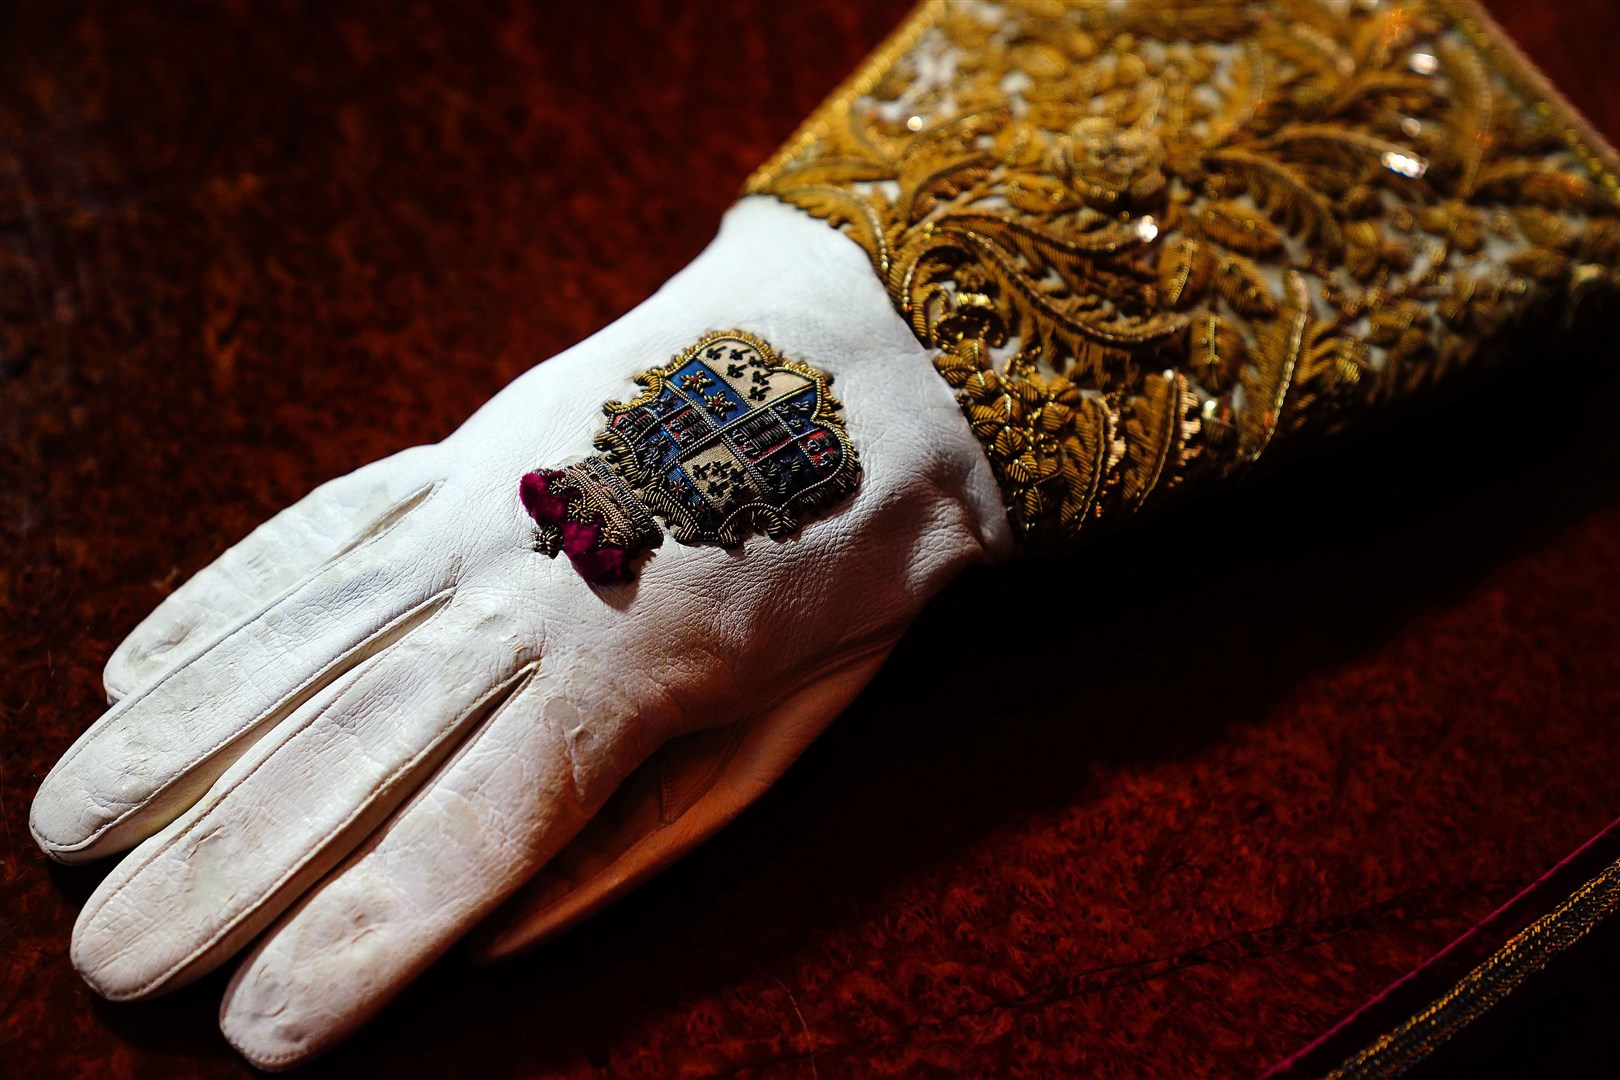 The Coronation Glove also known as the Coronation Gauntlet (Victoria Jones/PA)